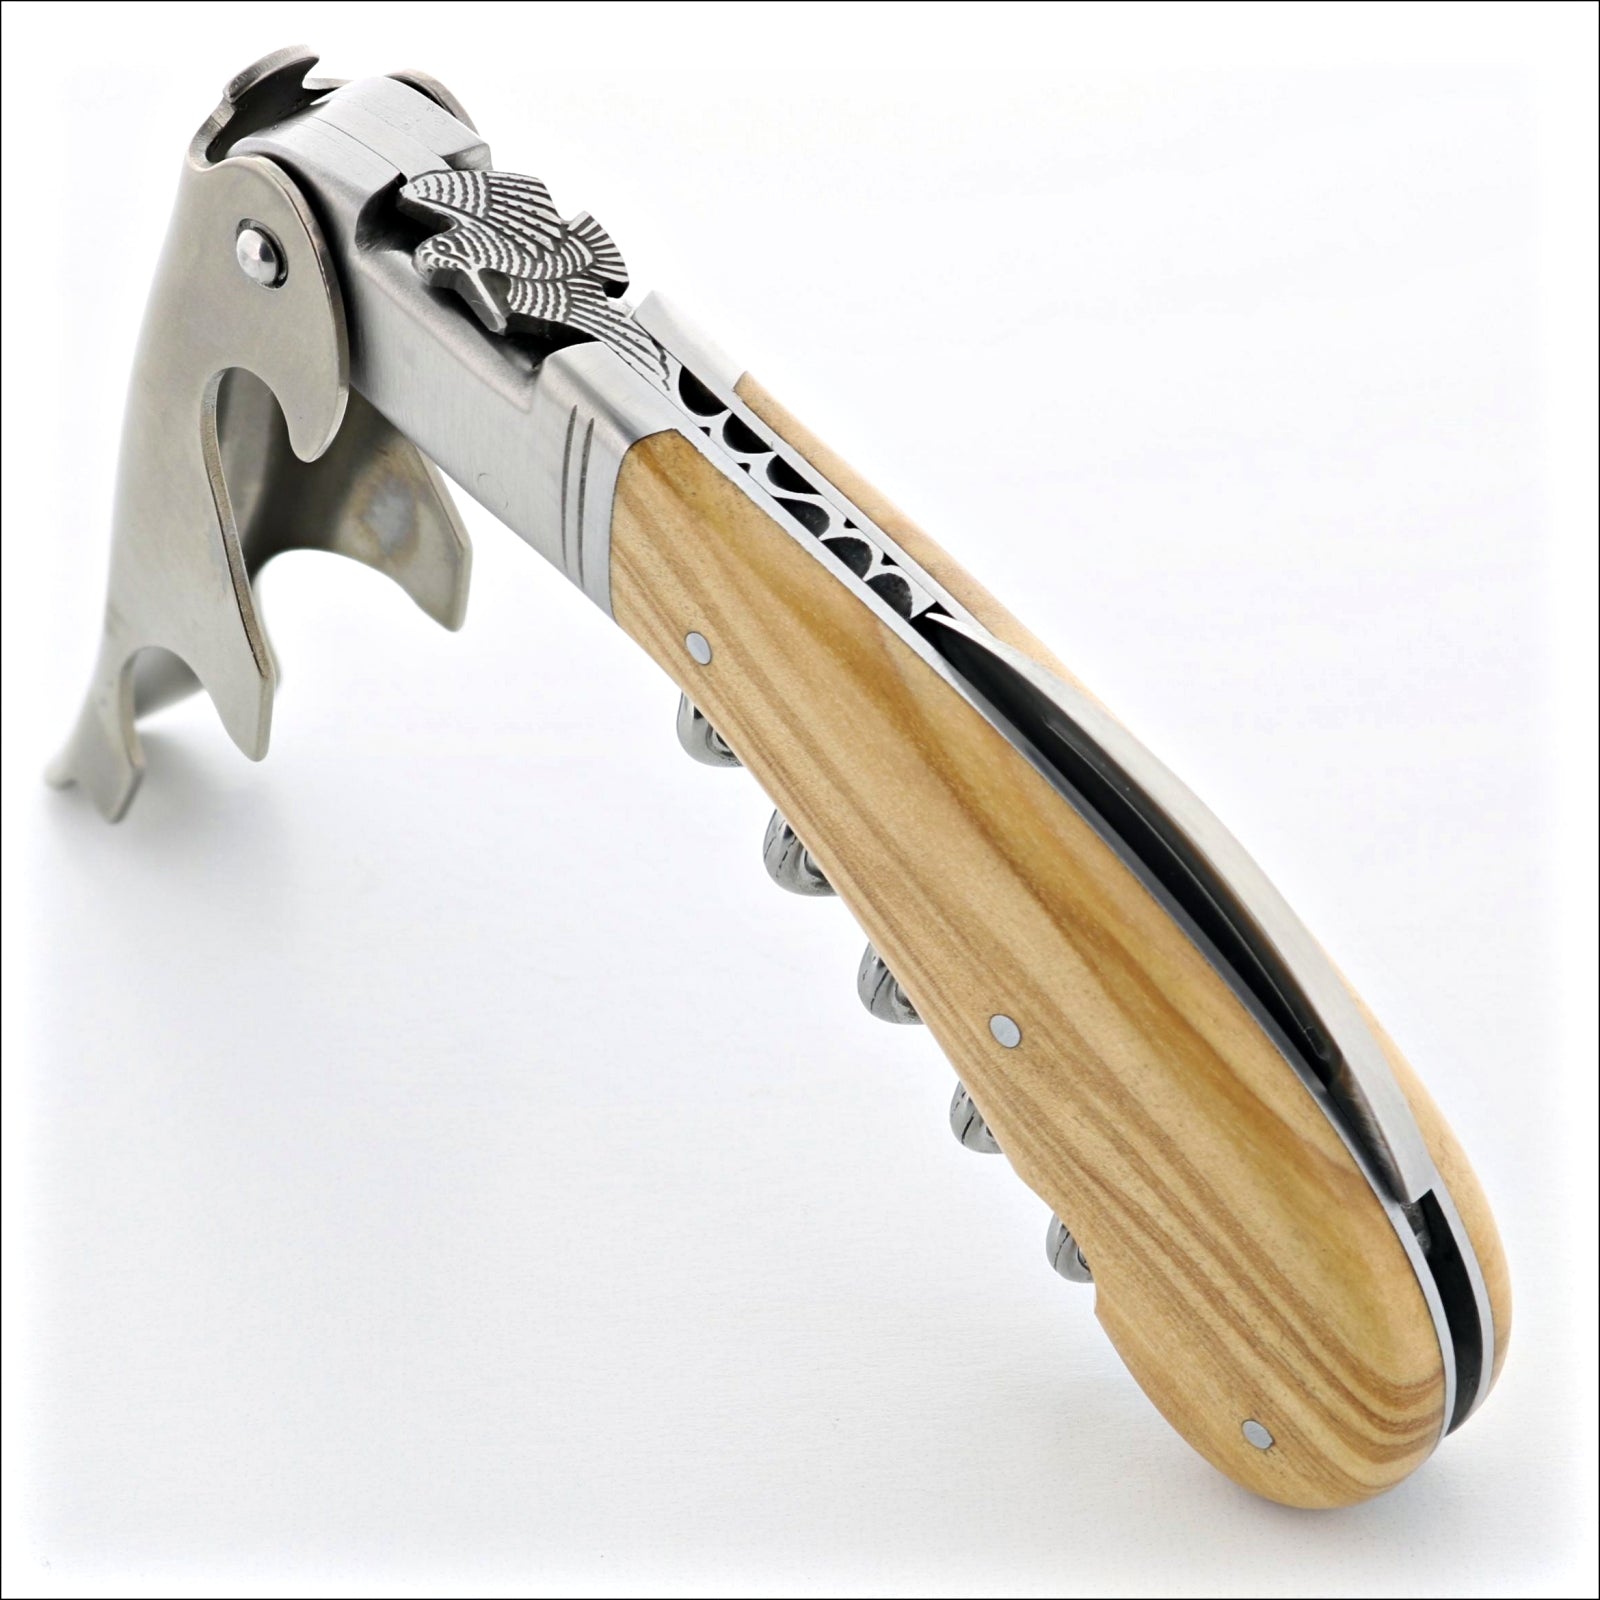 Laguiole wood and metal handle lever corkscrew